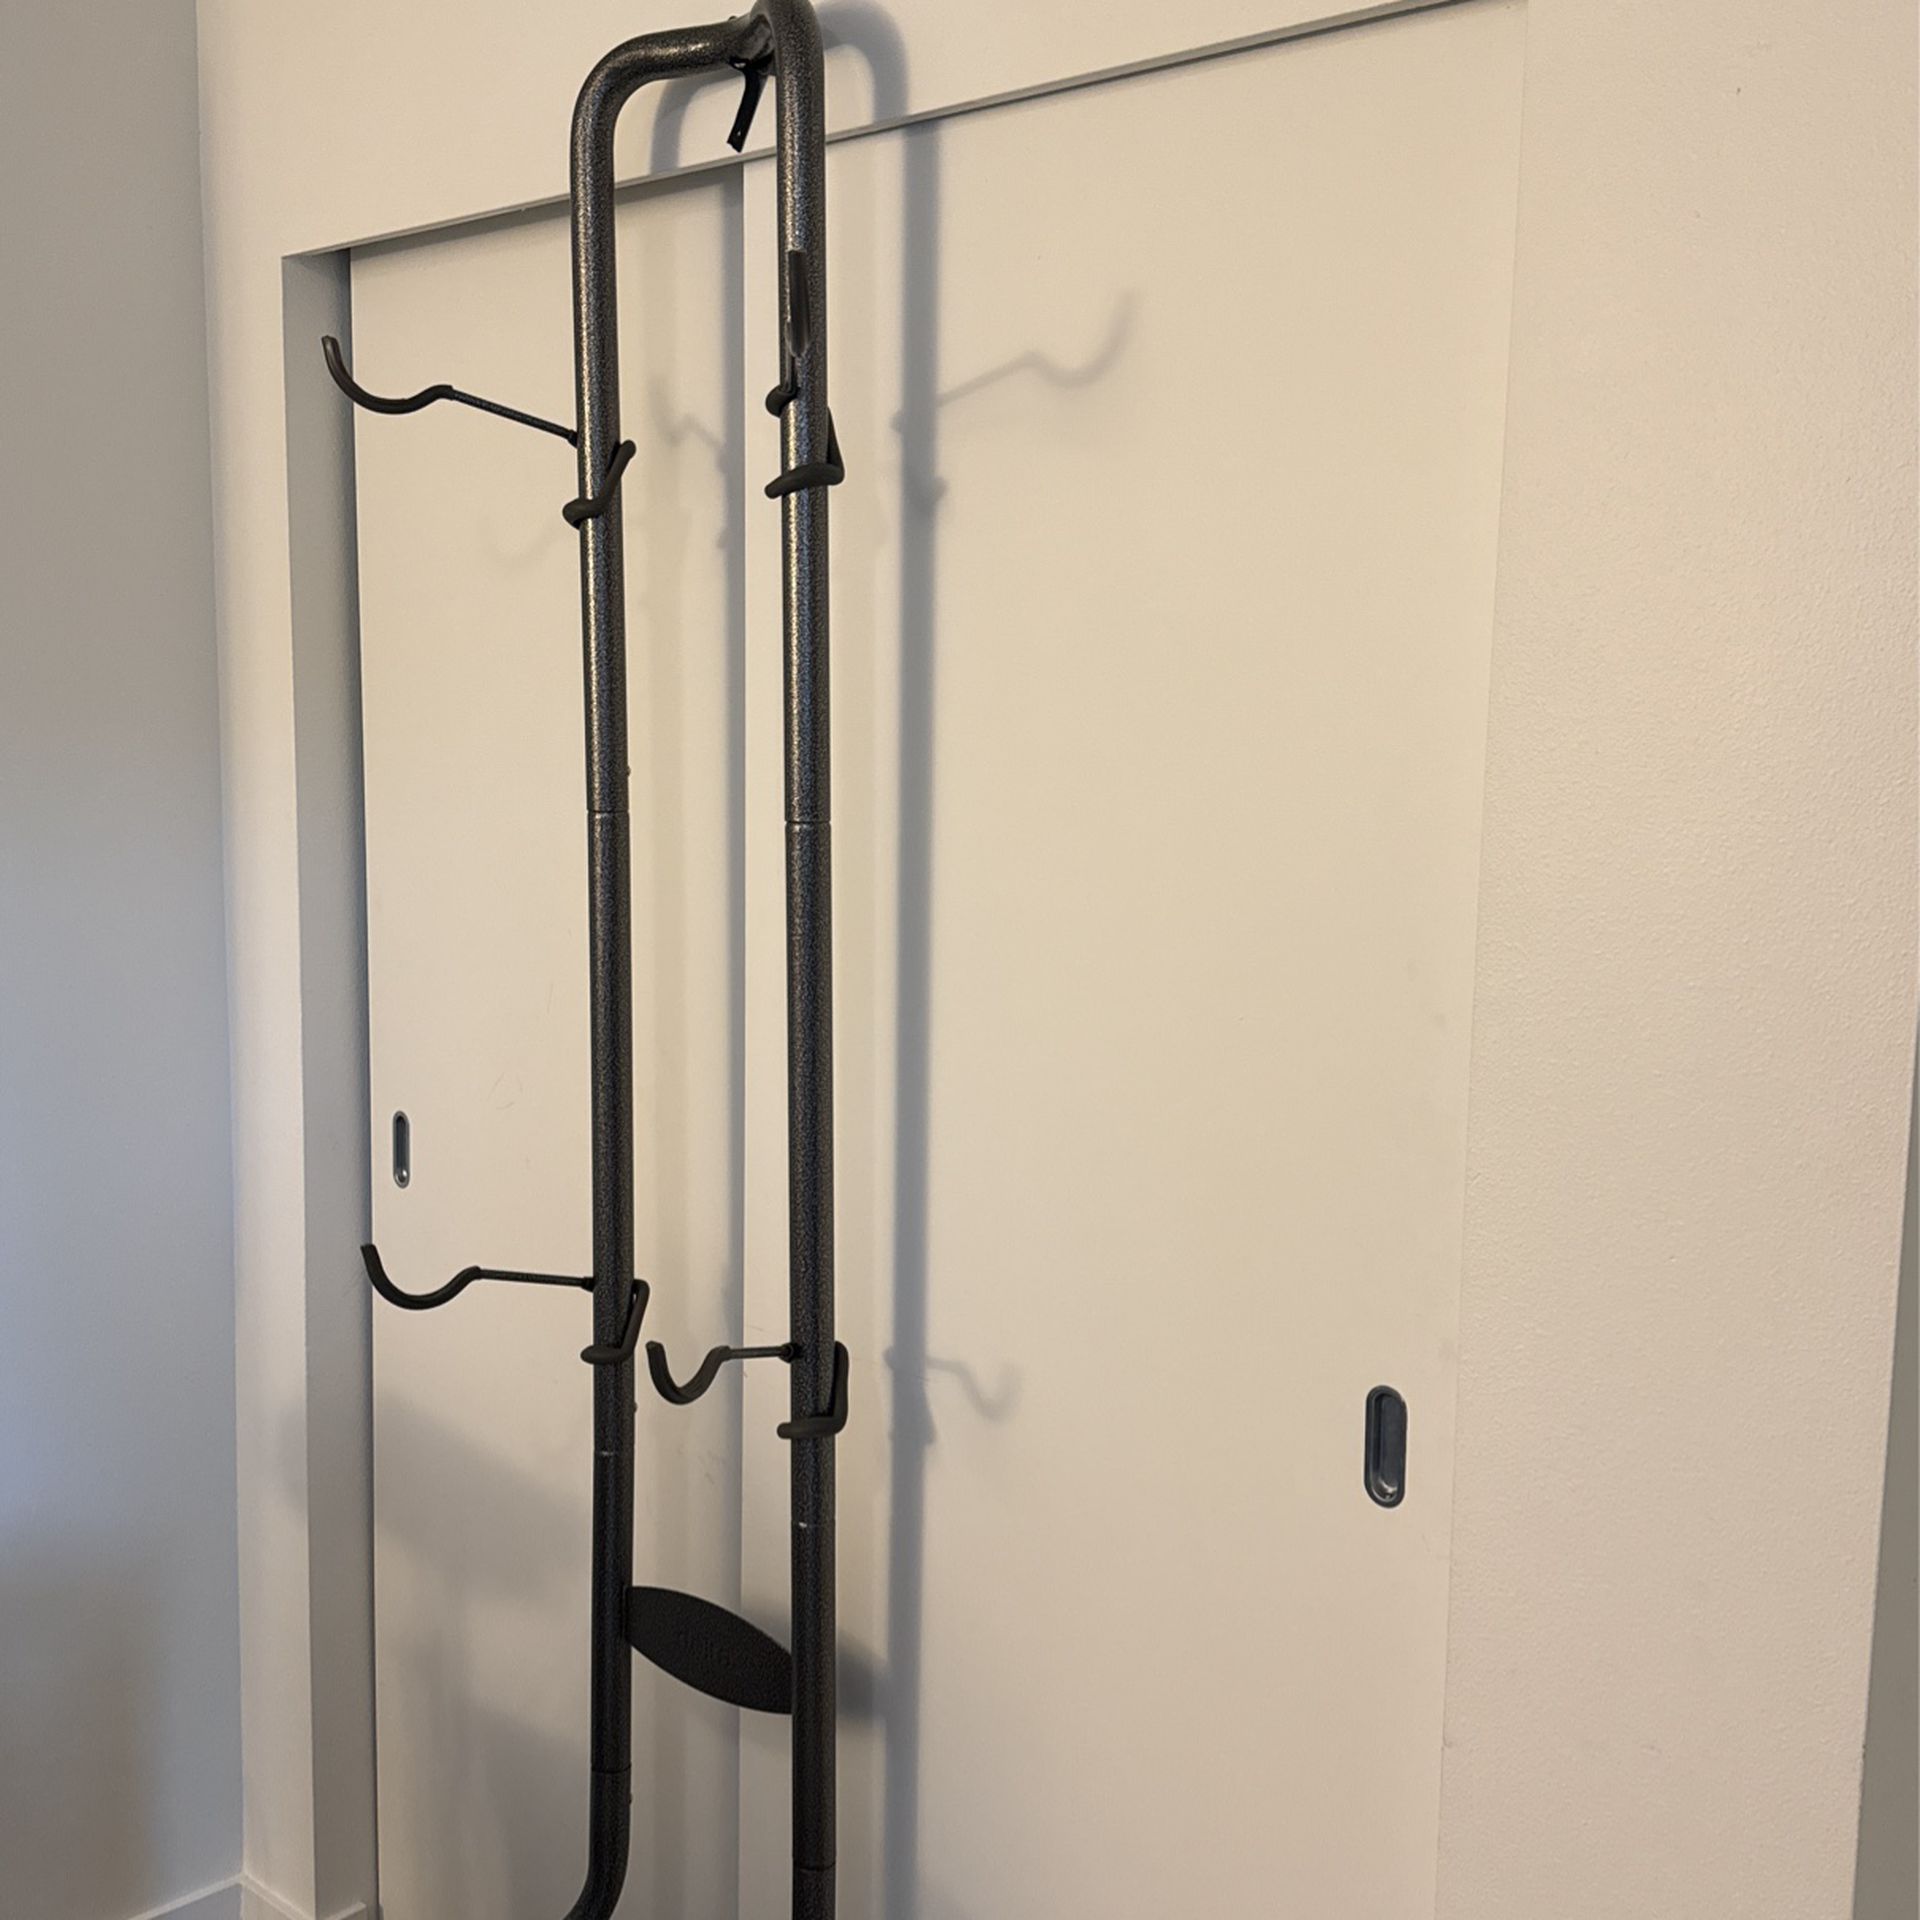 Rugged 2 Bike Rack for Garage & Home by Delta Cycle